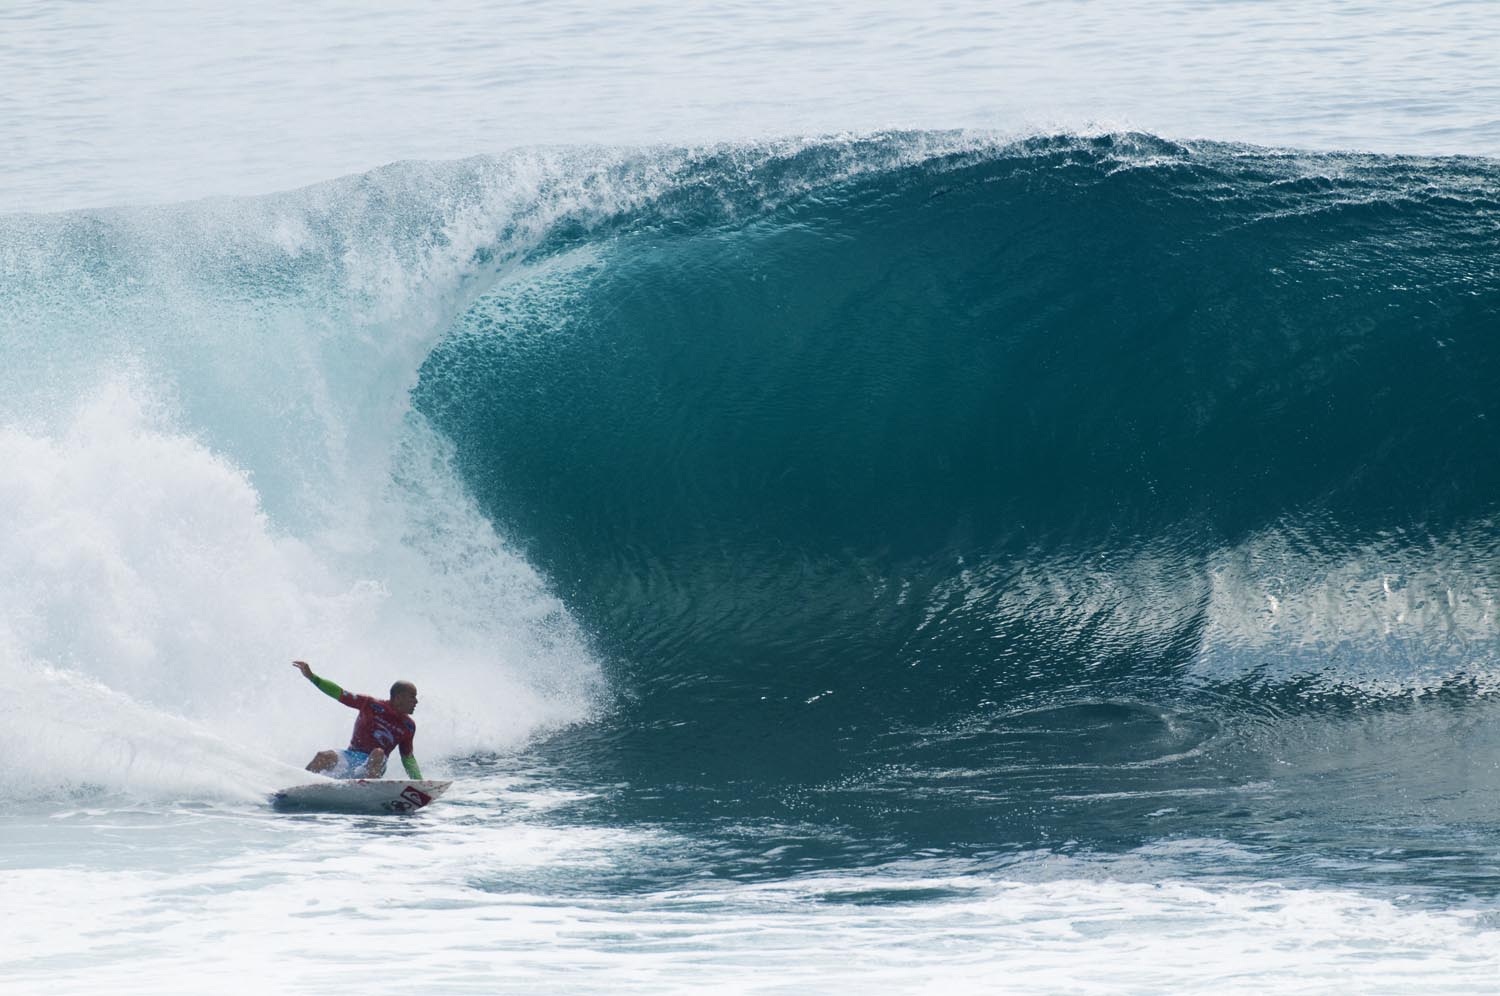 Japan Pro Surfing Tour was held in Bali